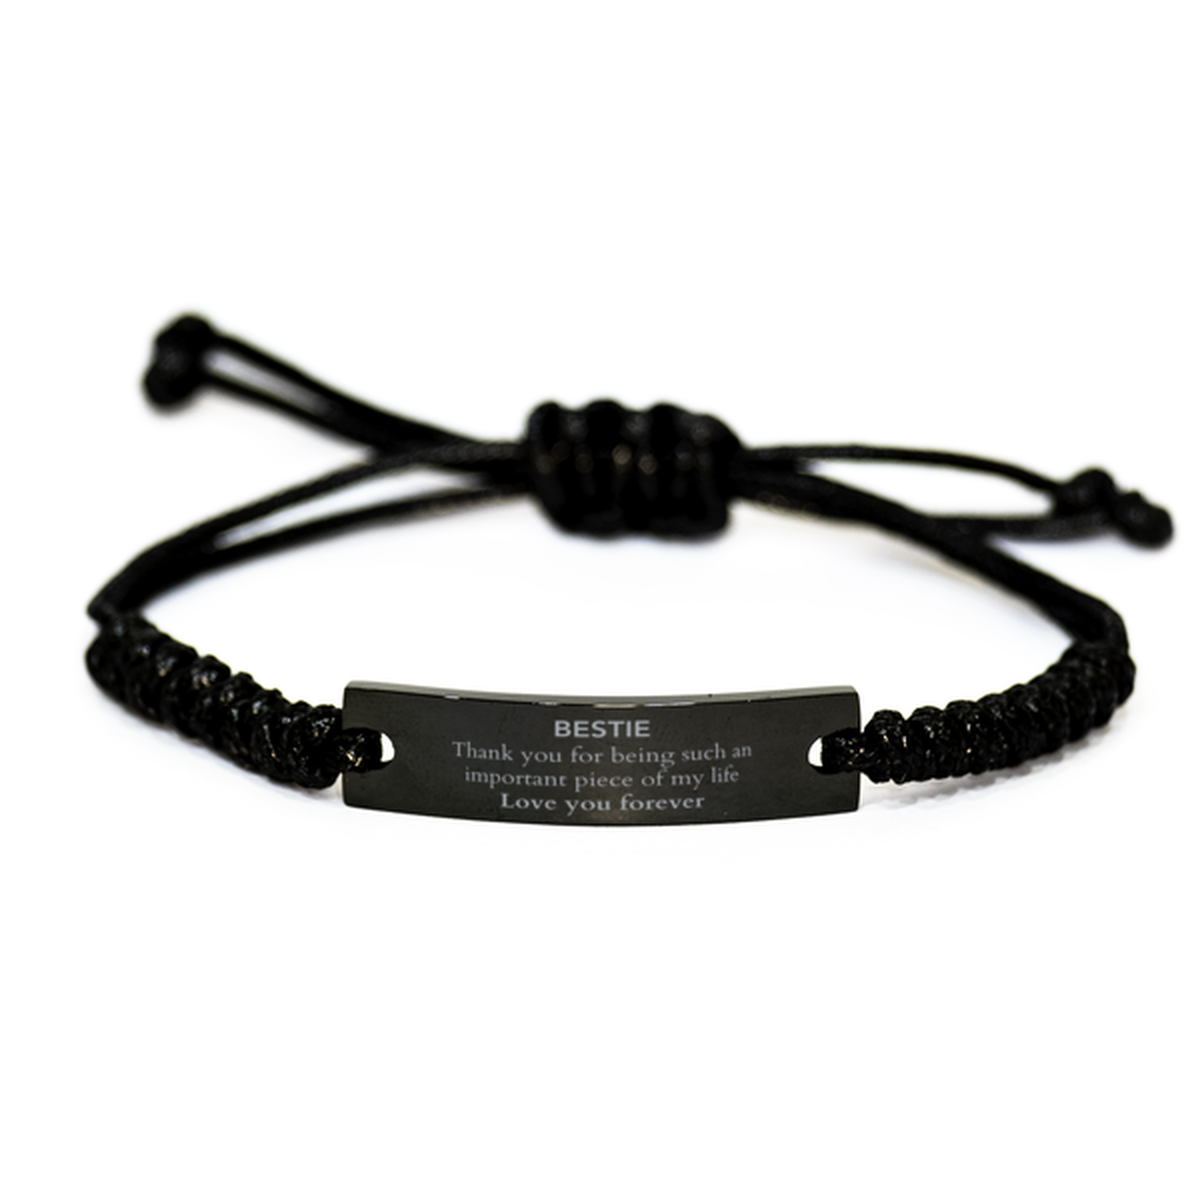 Appropriate Bestie Black Rope Bracelet Epic Birthday Gifts for Bestie Thank you for being such an important piece of my life Bestie Christmas Mothers Fathers Day